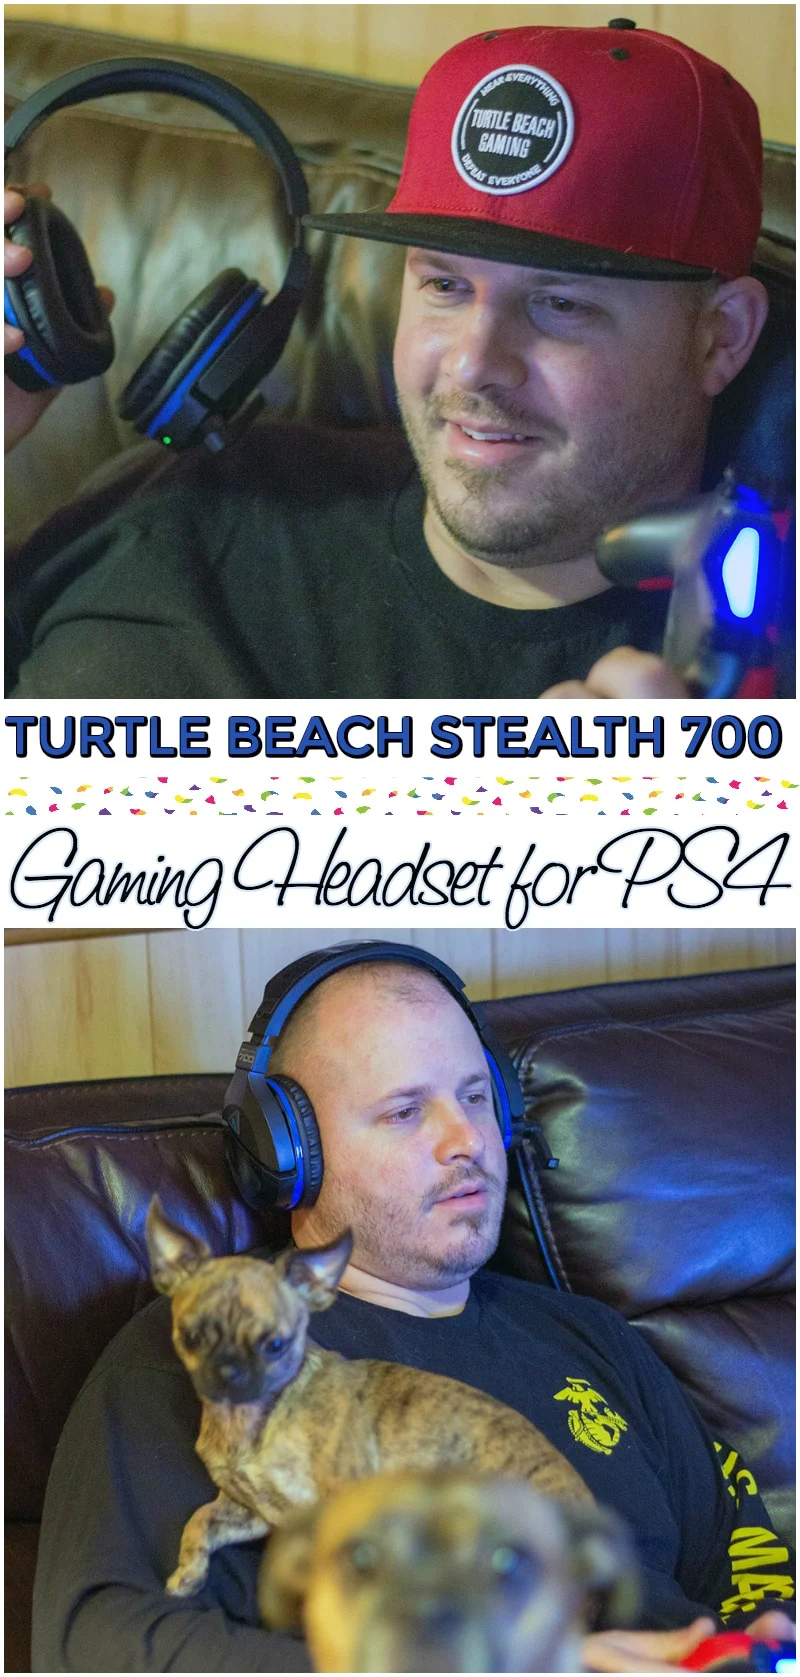 Thoughts about the Turtle Beach PS4 Headset from an OG (Original Gamer)